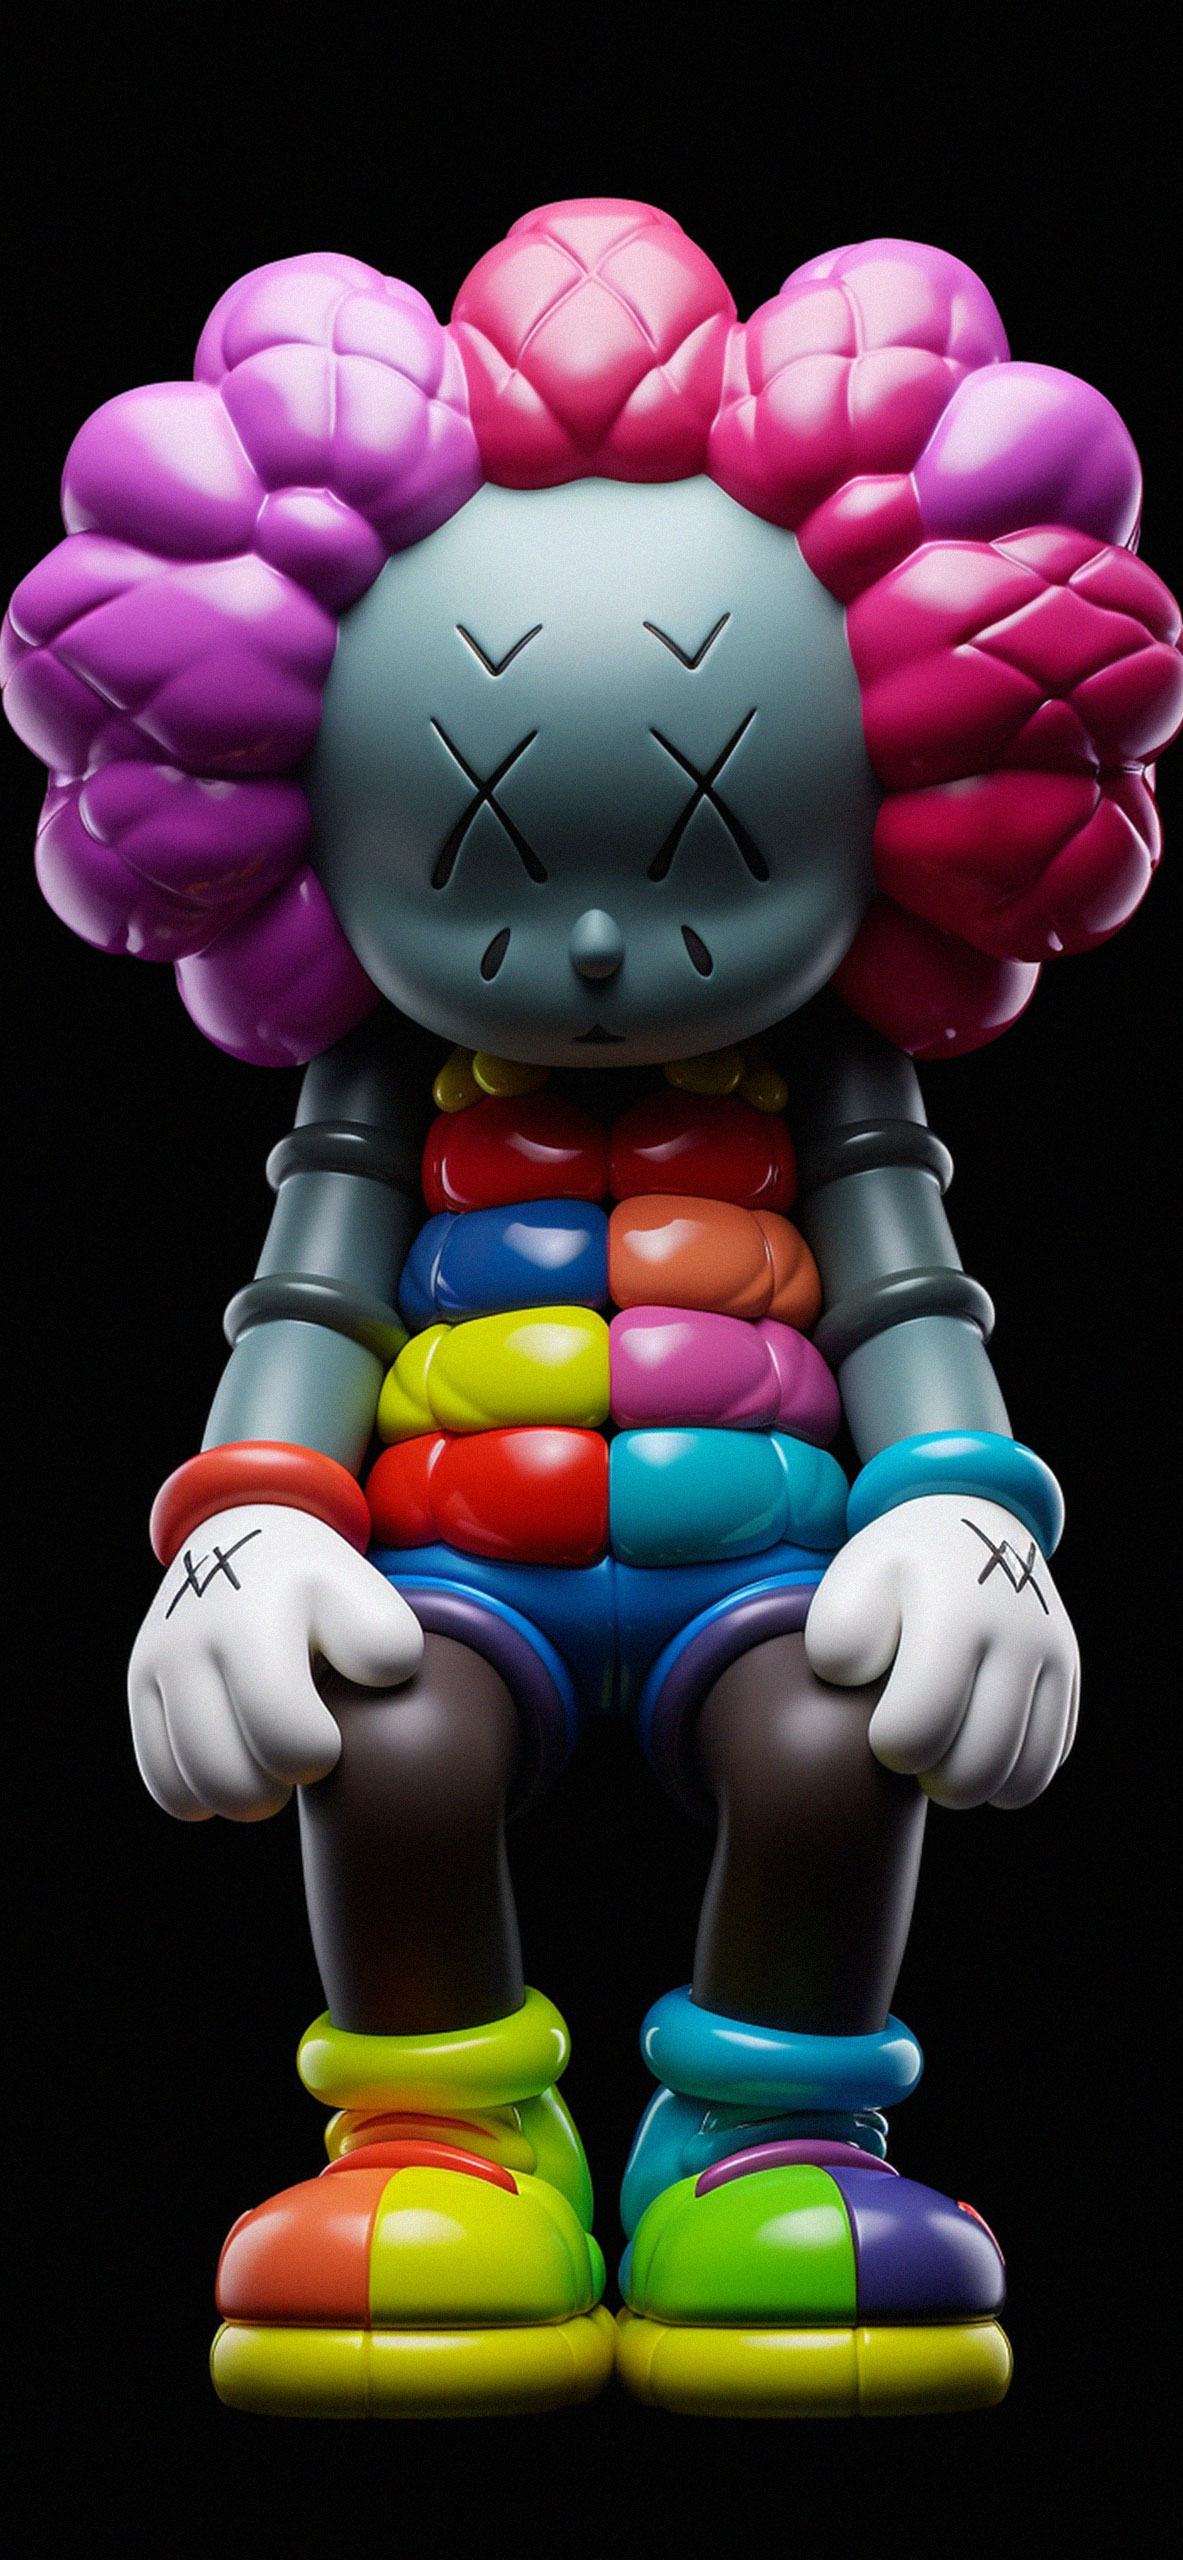 Download Have the coolest phone in town with the Kaws iPhone Wallpaper   Wallpaperscom